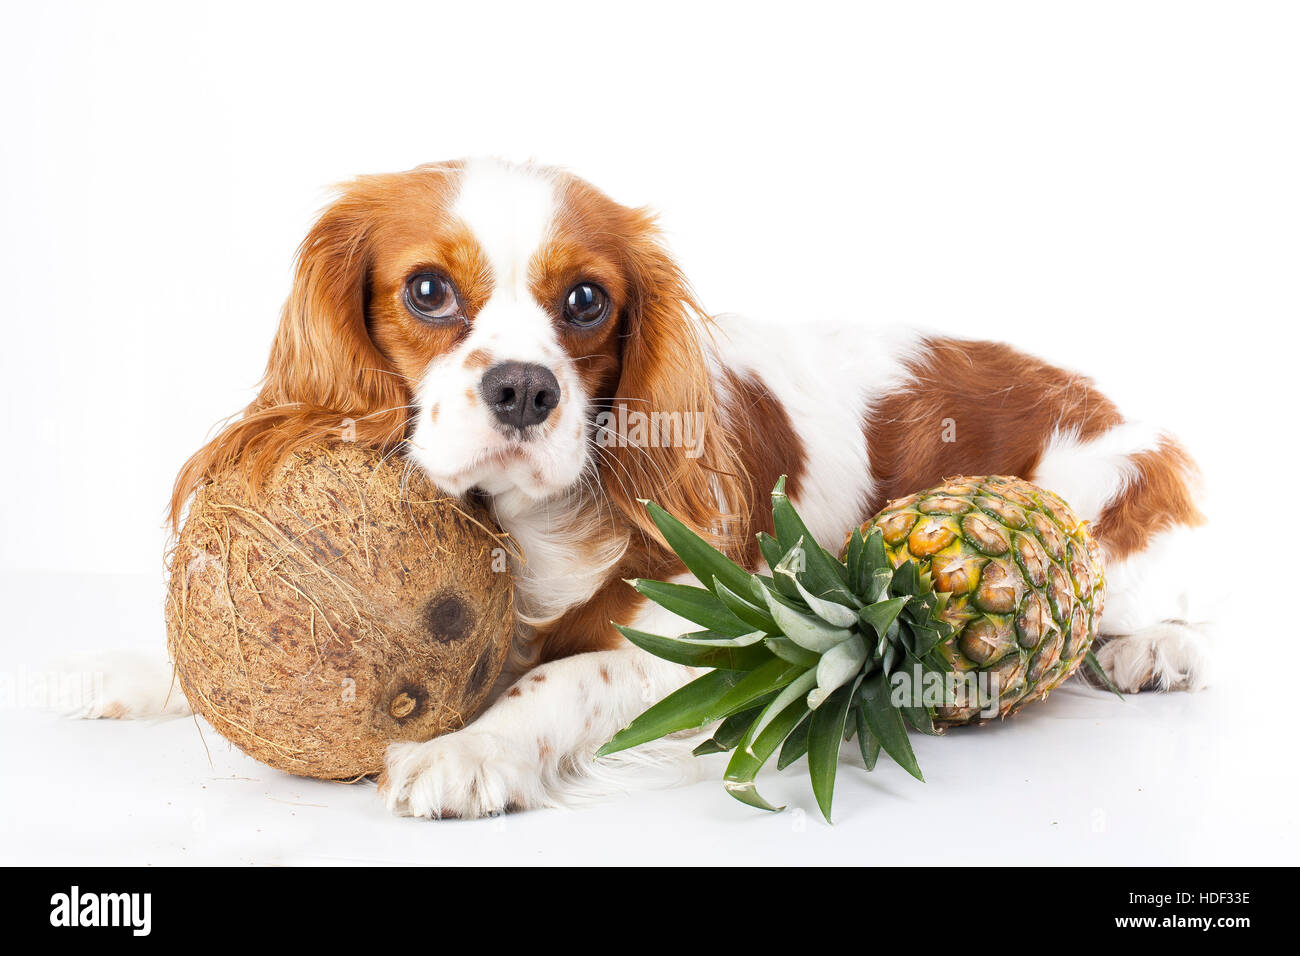 Can dogs eat fruit illustration. Tropical fruit and cavalier king charles spaniel dog. Dog with fruit food. Dog health care. Stock Photo